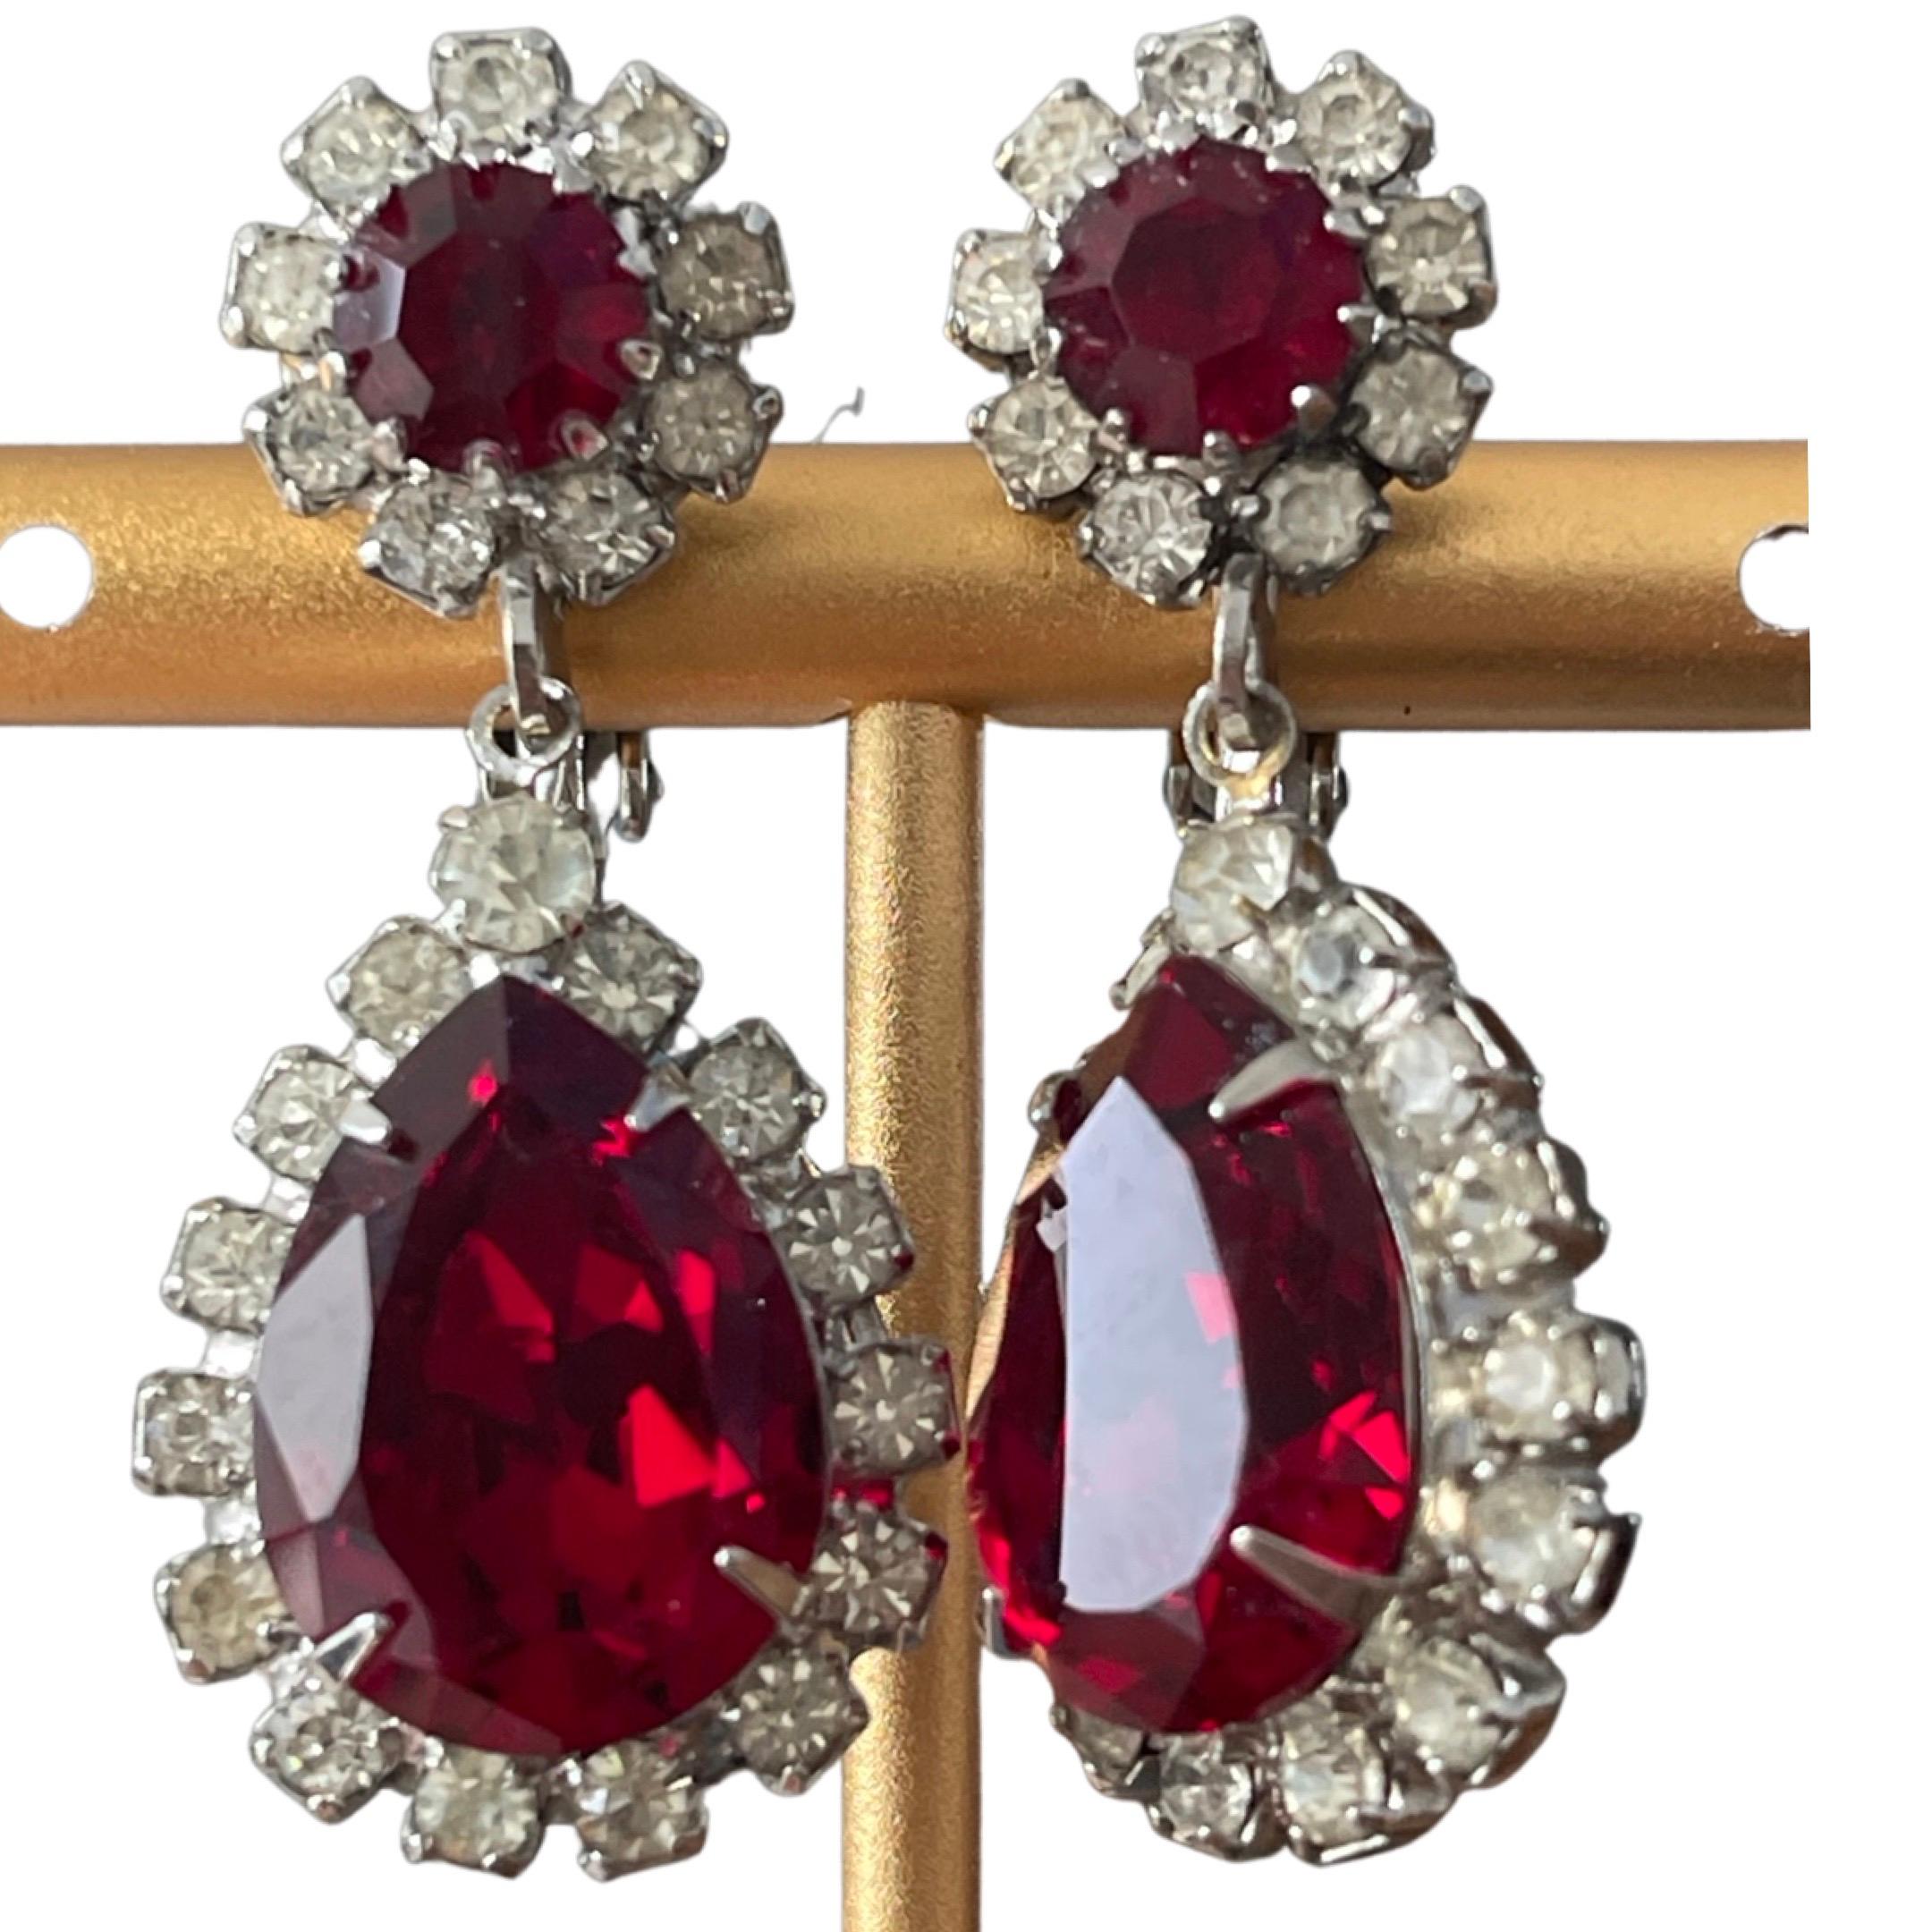 Elegant drop-style earrings that feature one of designer Louis Kramer, extraordinary designs. A red flower Austrian crystal ruby drops into another pear-shaped red Austrian crystal both surrounded by the highest quality Austrian rhinestones. 

In